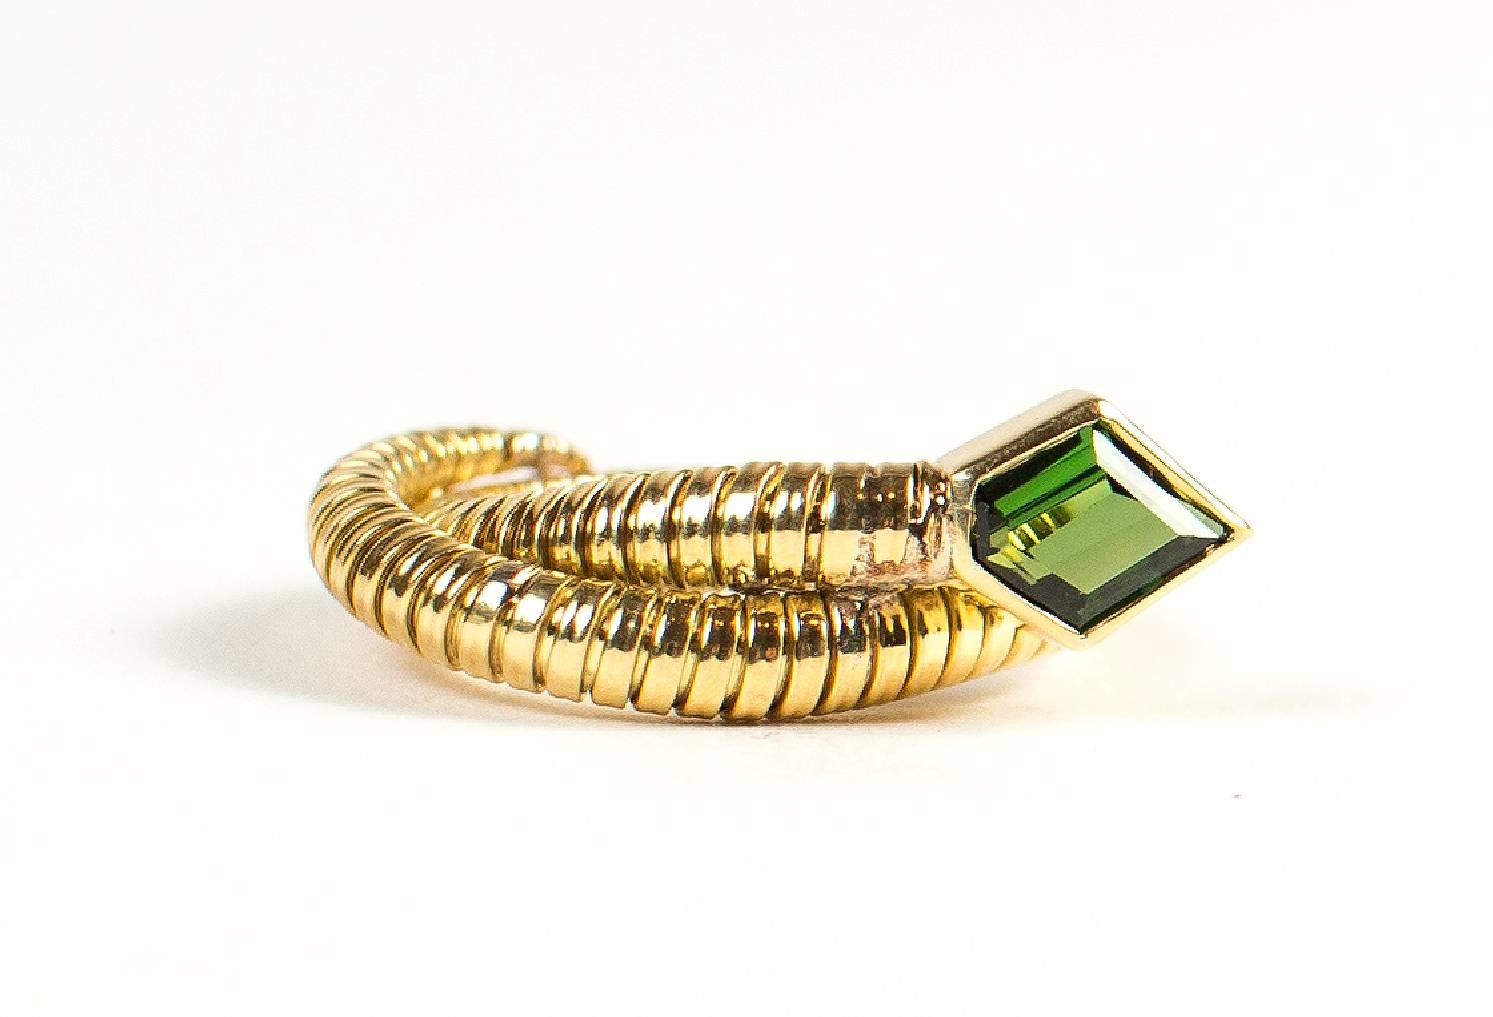 Handmade 18kt yellow gold ring. Flexible shank and freeform almost emerald cut sparkling apple green tourmaline (approximately 5mm x 5mm) bezel set  in what could look like the head of a snake.  This flexible ring is incredibly comfortable to wear